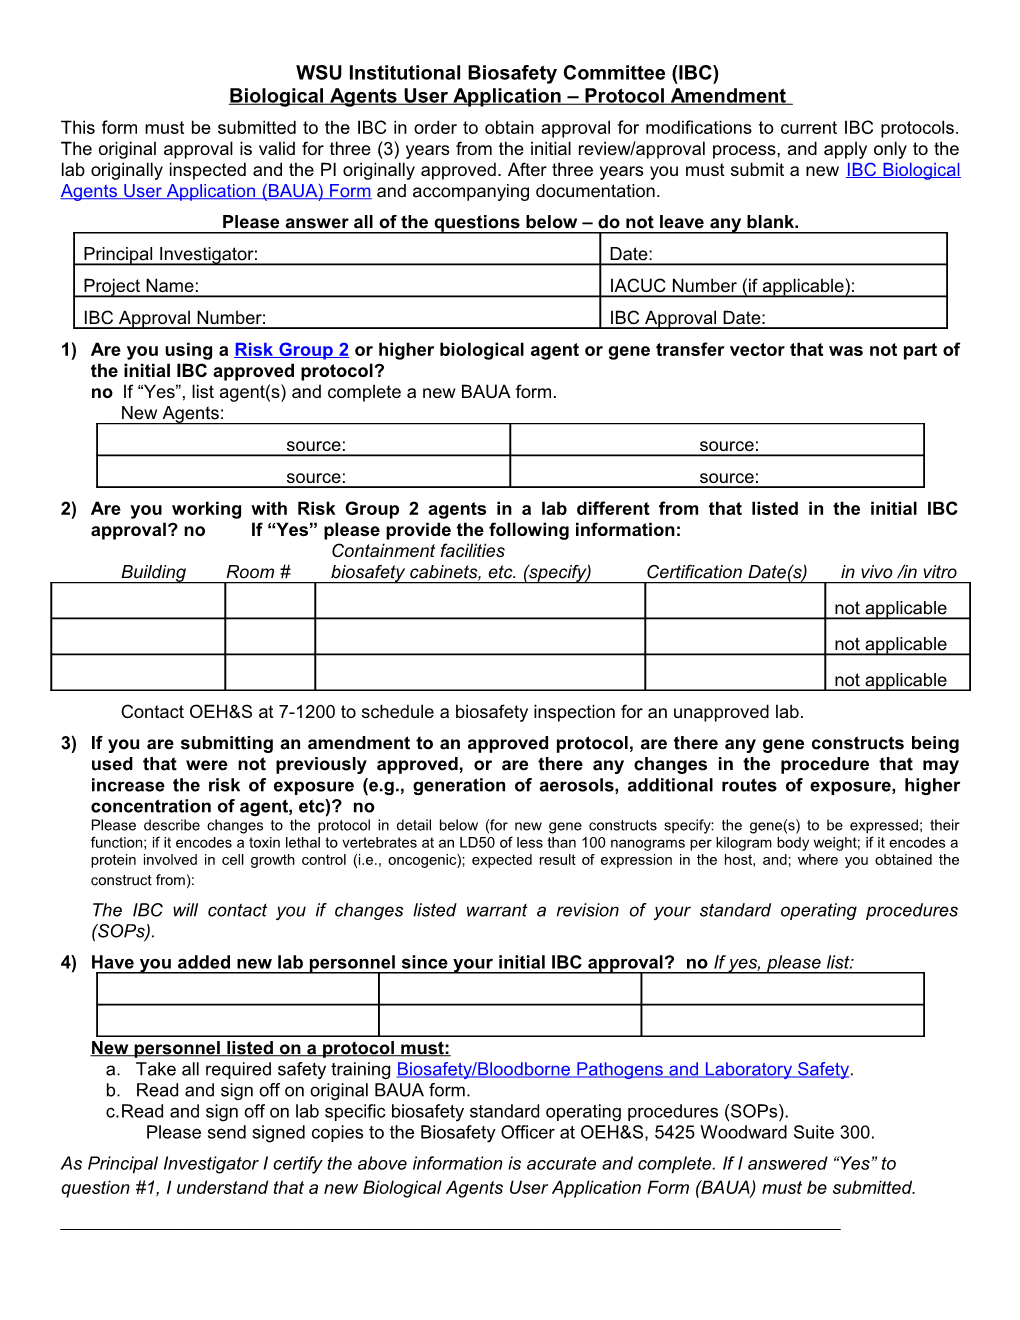 WSU Institutional Biosafety Committee (IBC) Revision Application